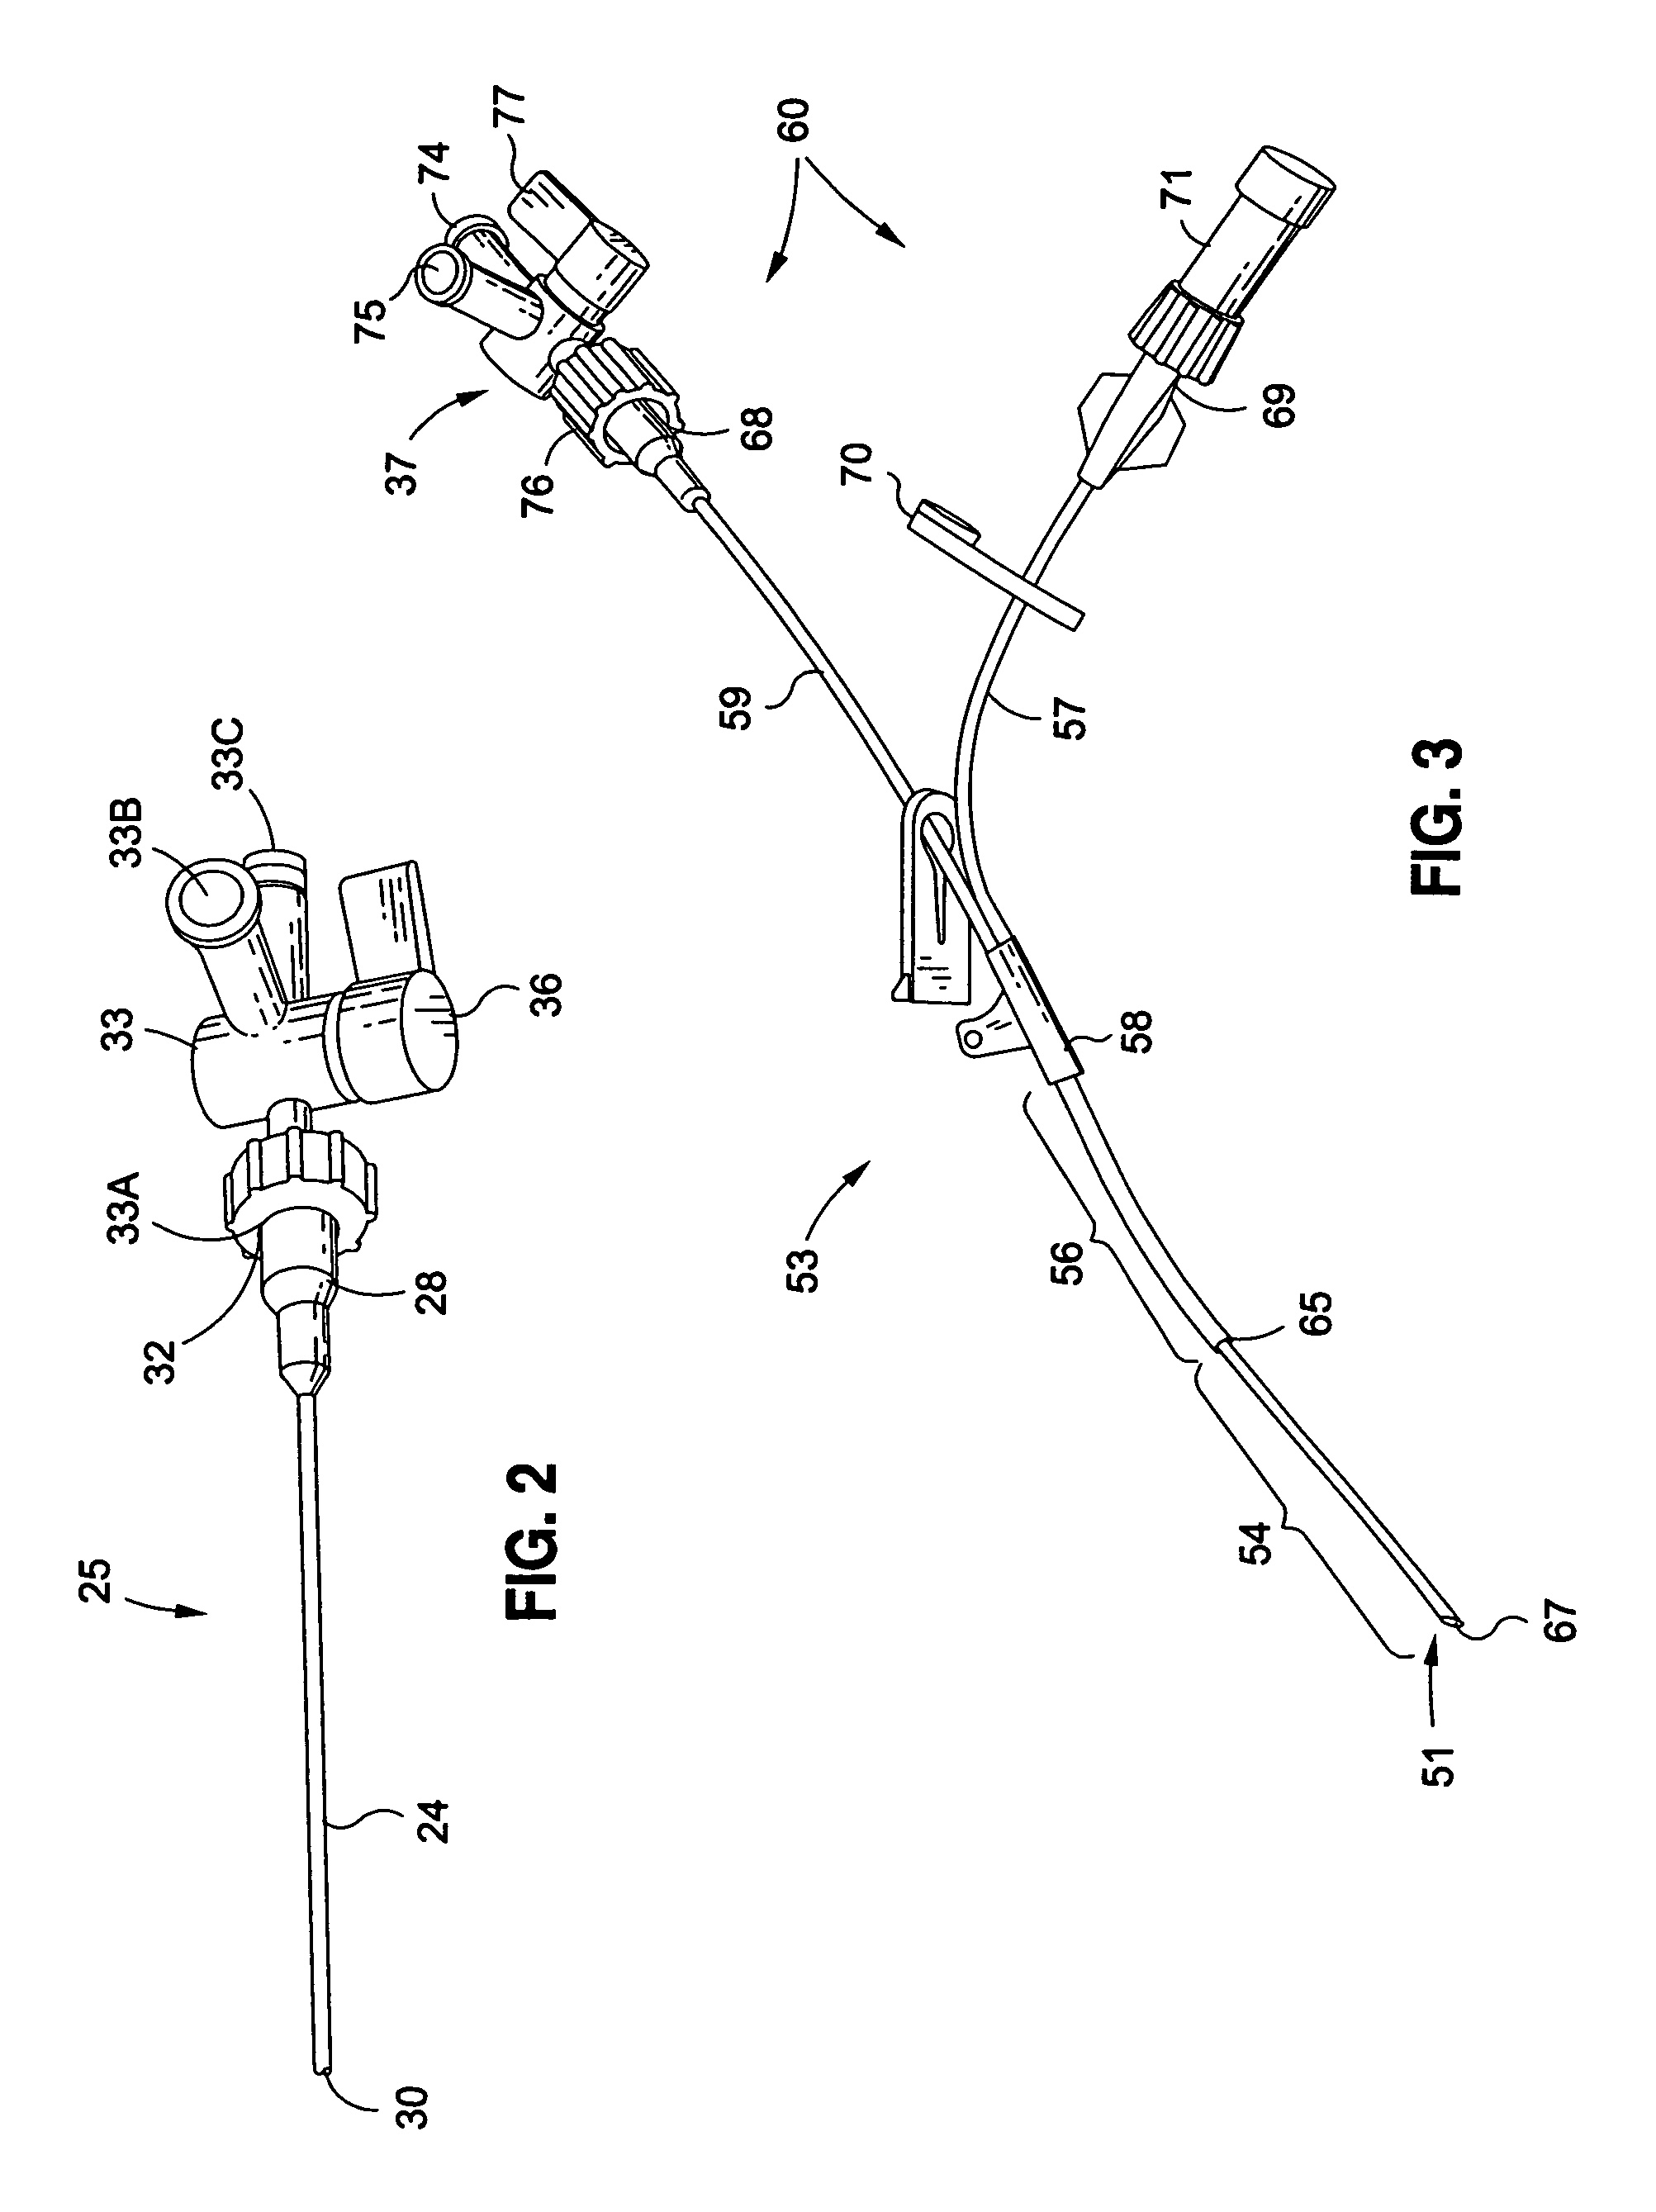 System and method for diverting flow to facilitate measurement of system parameters